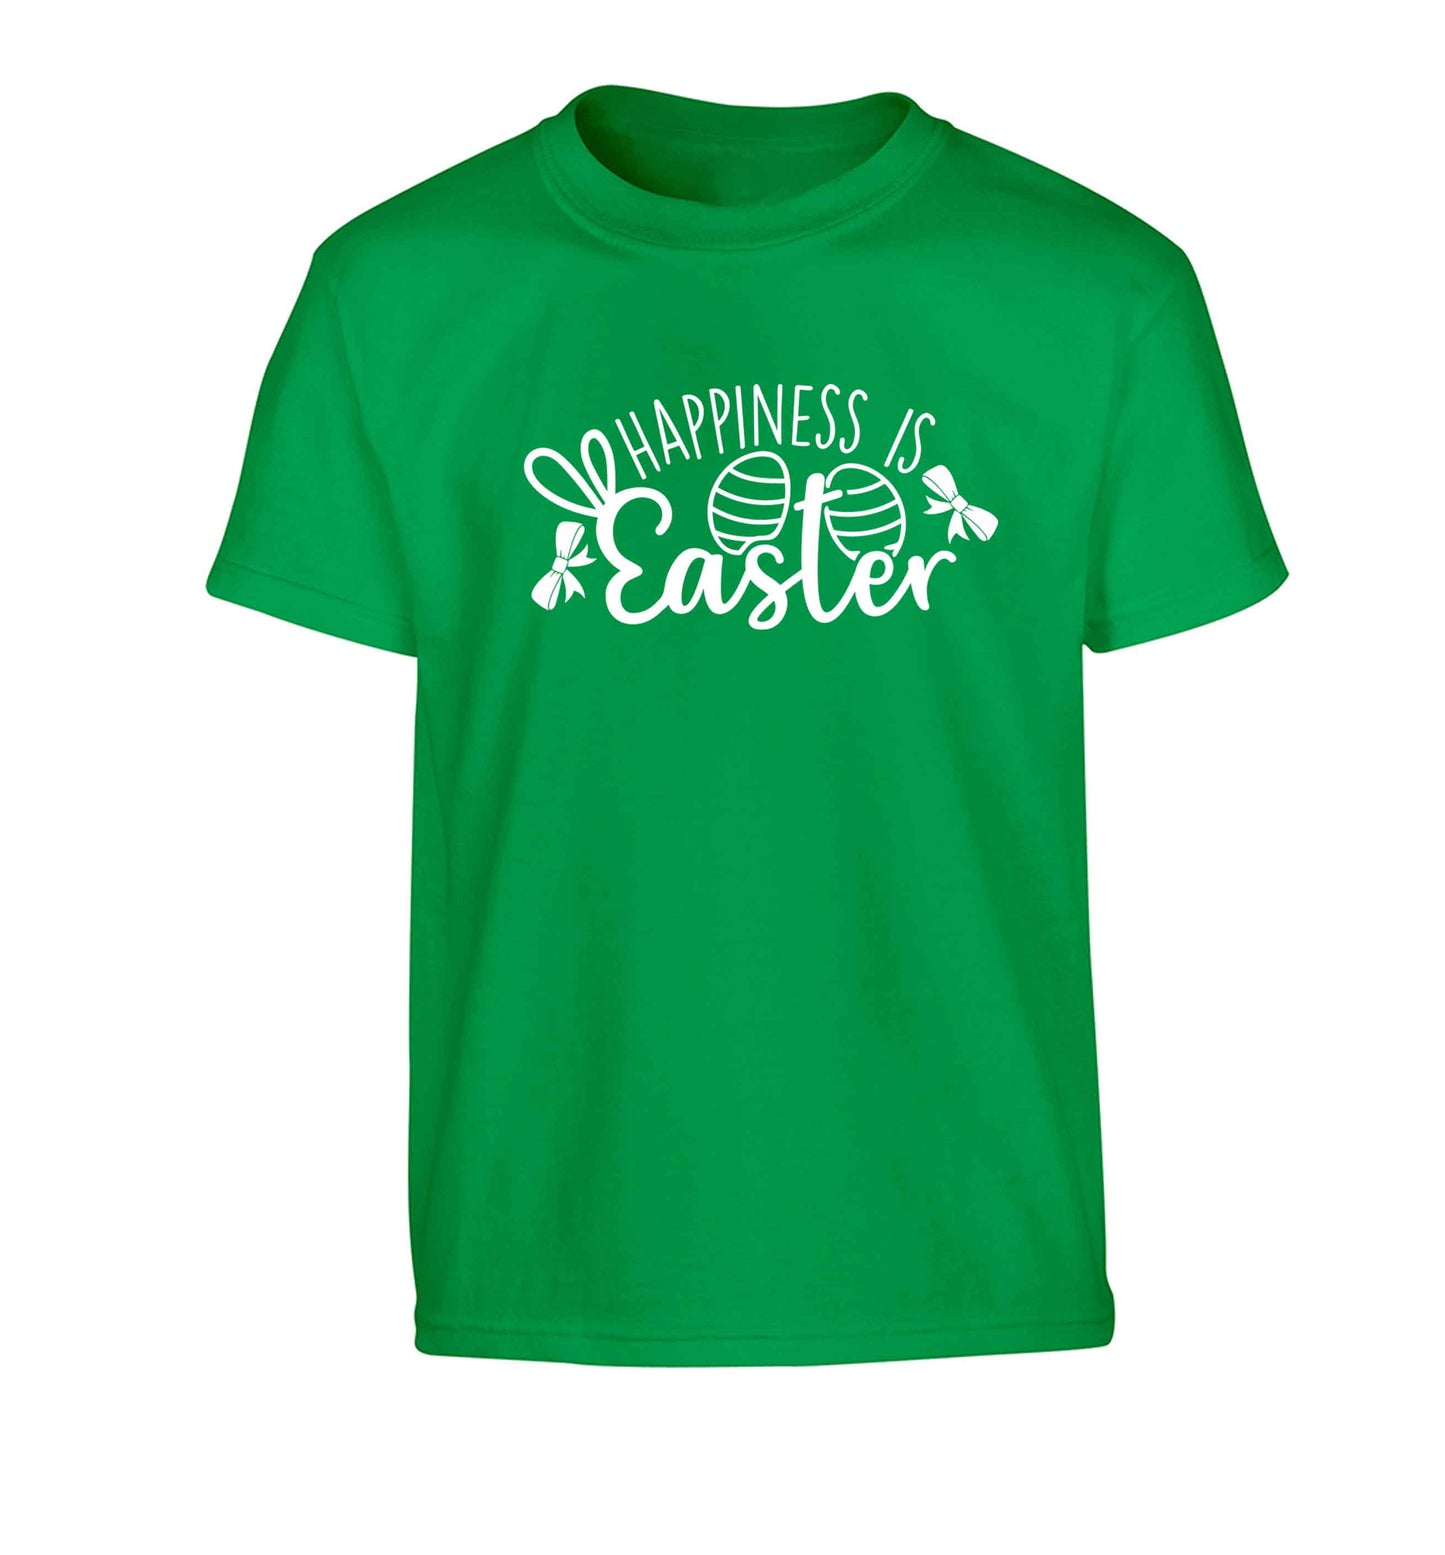 Happiness is easter Children's green Tshirt 12-13 Years